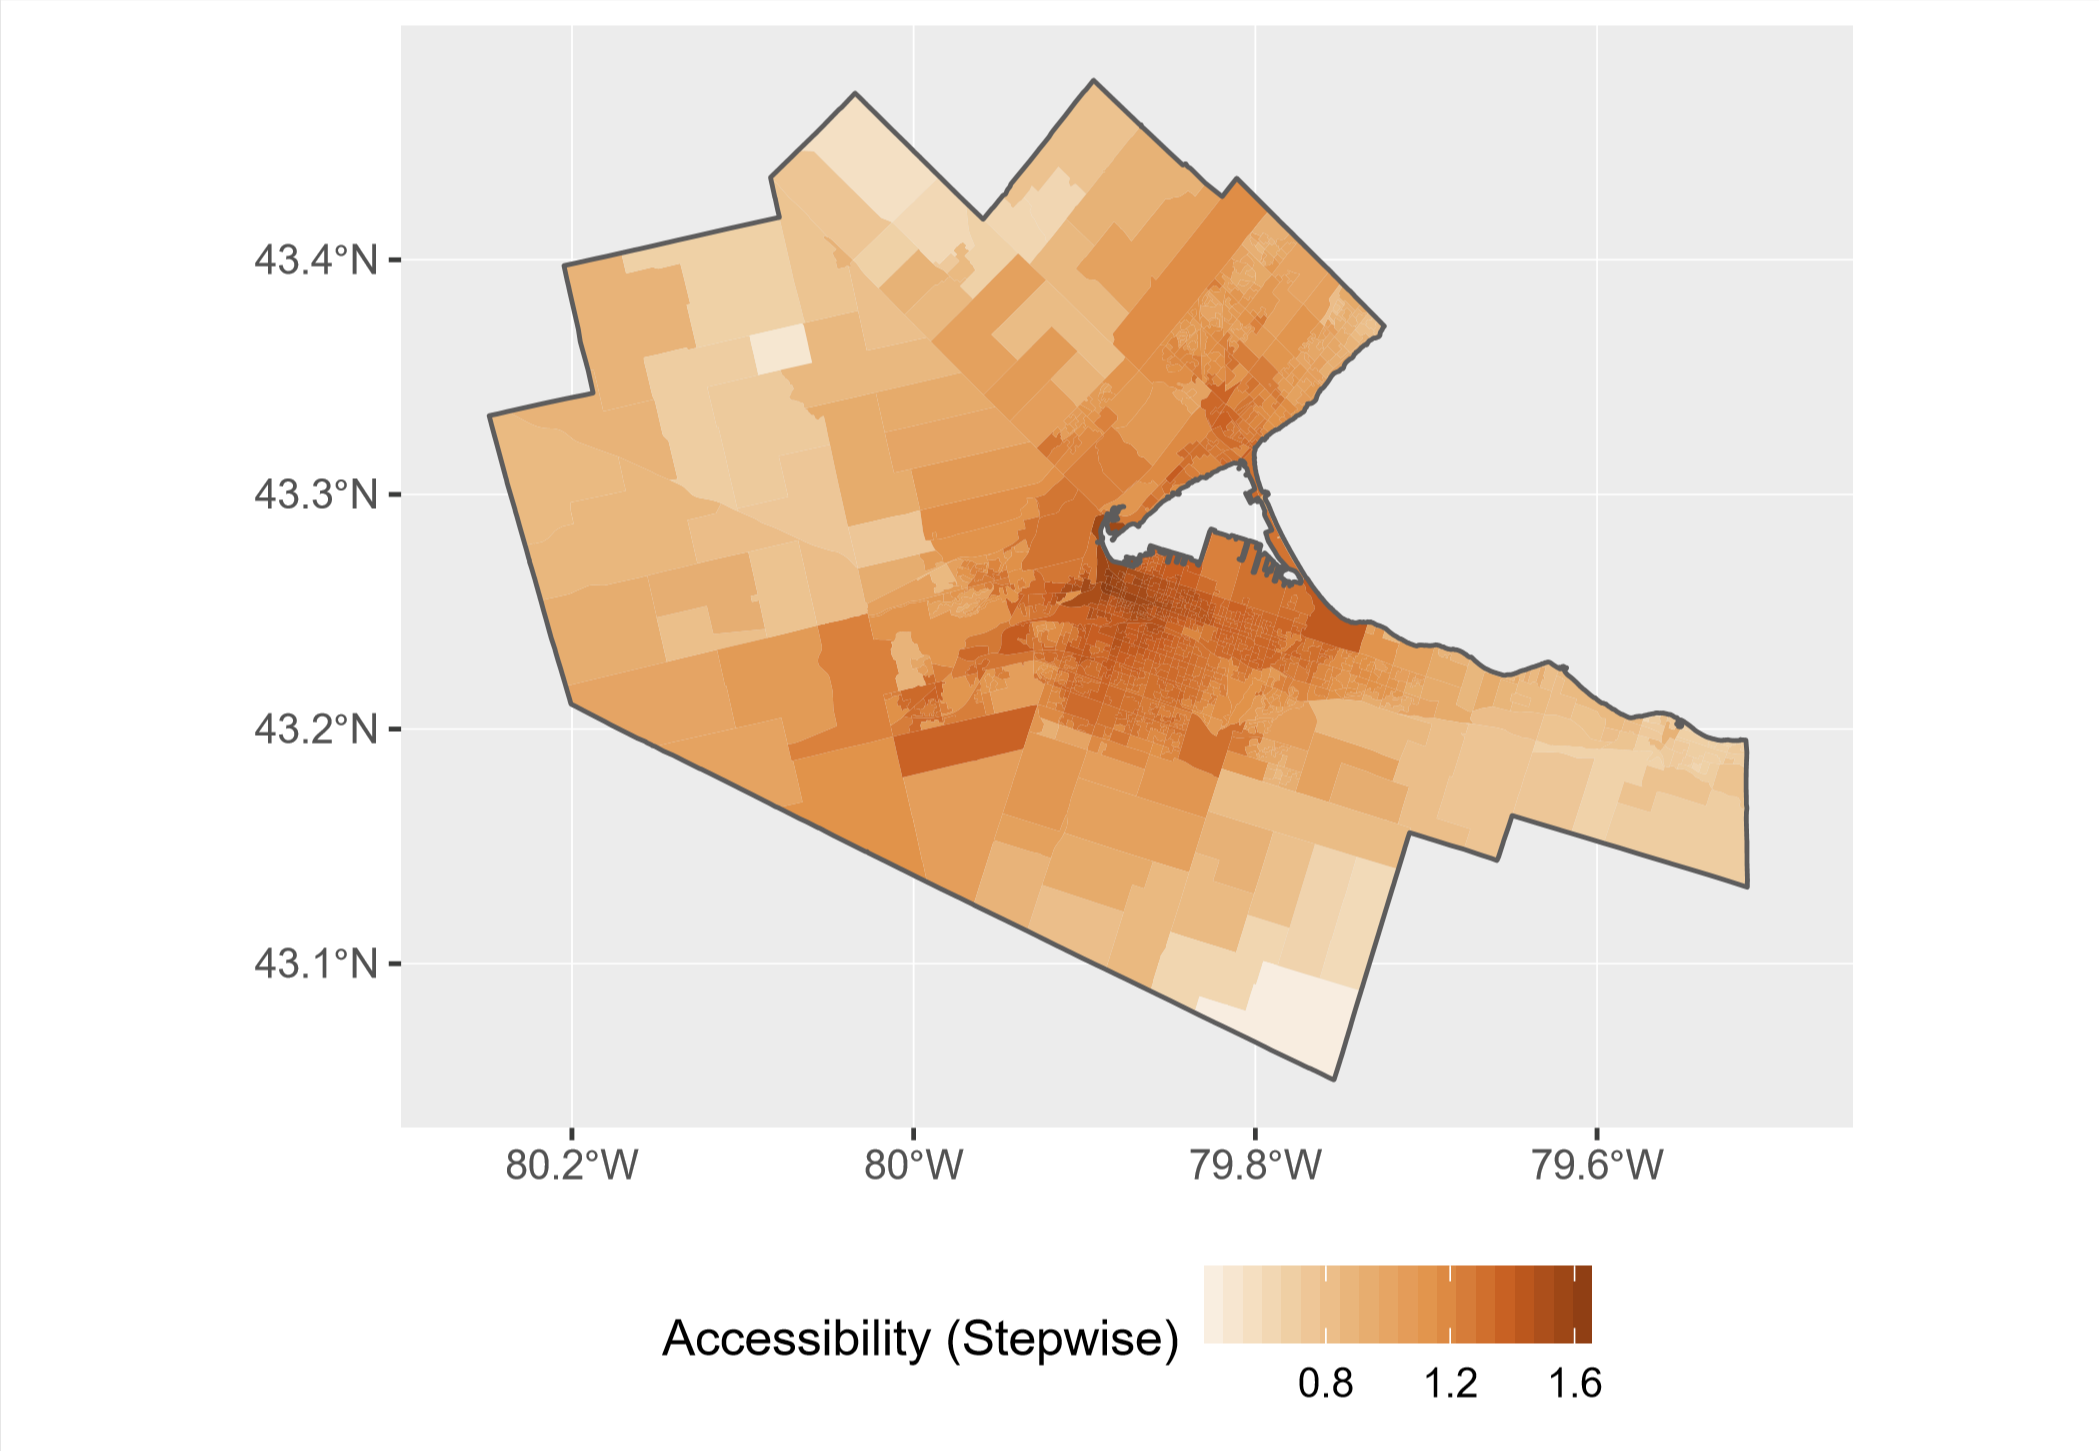 \label{fig:visualization-example-2} Example of visualization: accessibility to family doctors in Hamilton (from [Paez, Higgins, and Vivona (2018)](https://doi.org/10.1371/journal.pone.0218773))